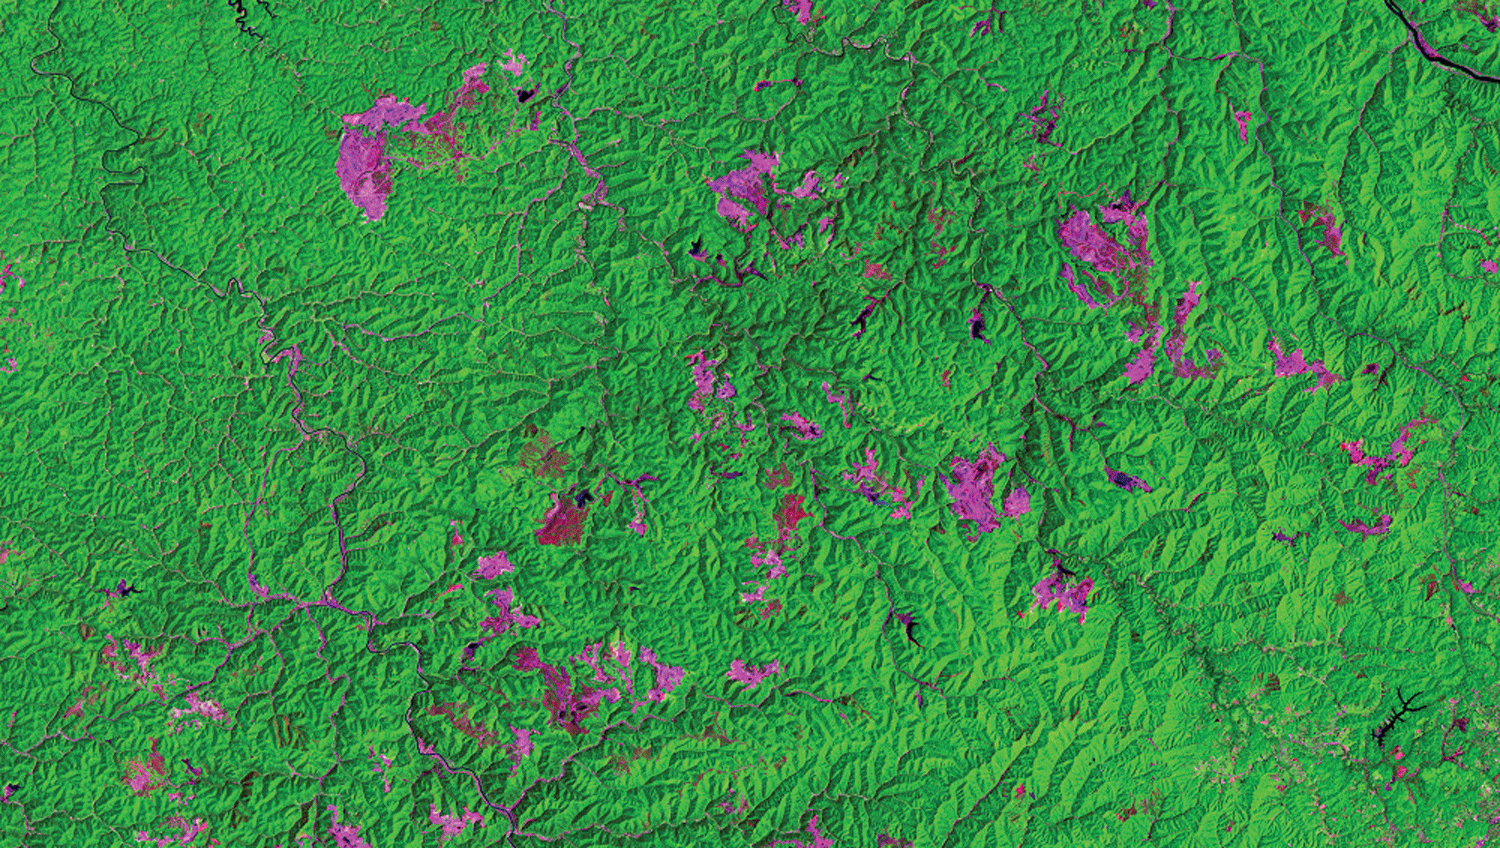 Landsat 5 image of Charleston shows areas of mine-related disturbances as clusters
                     throughout the image area.